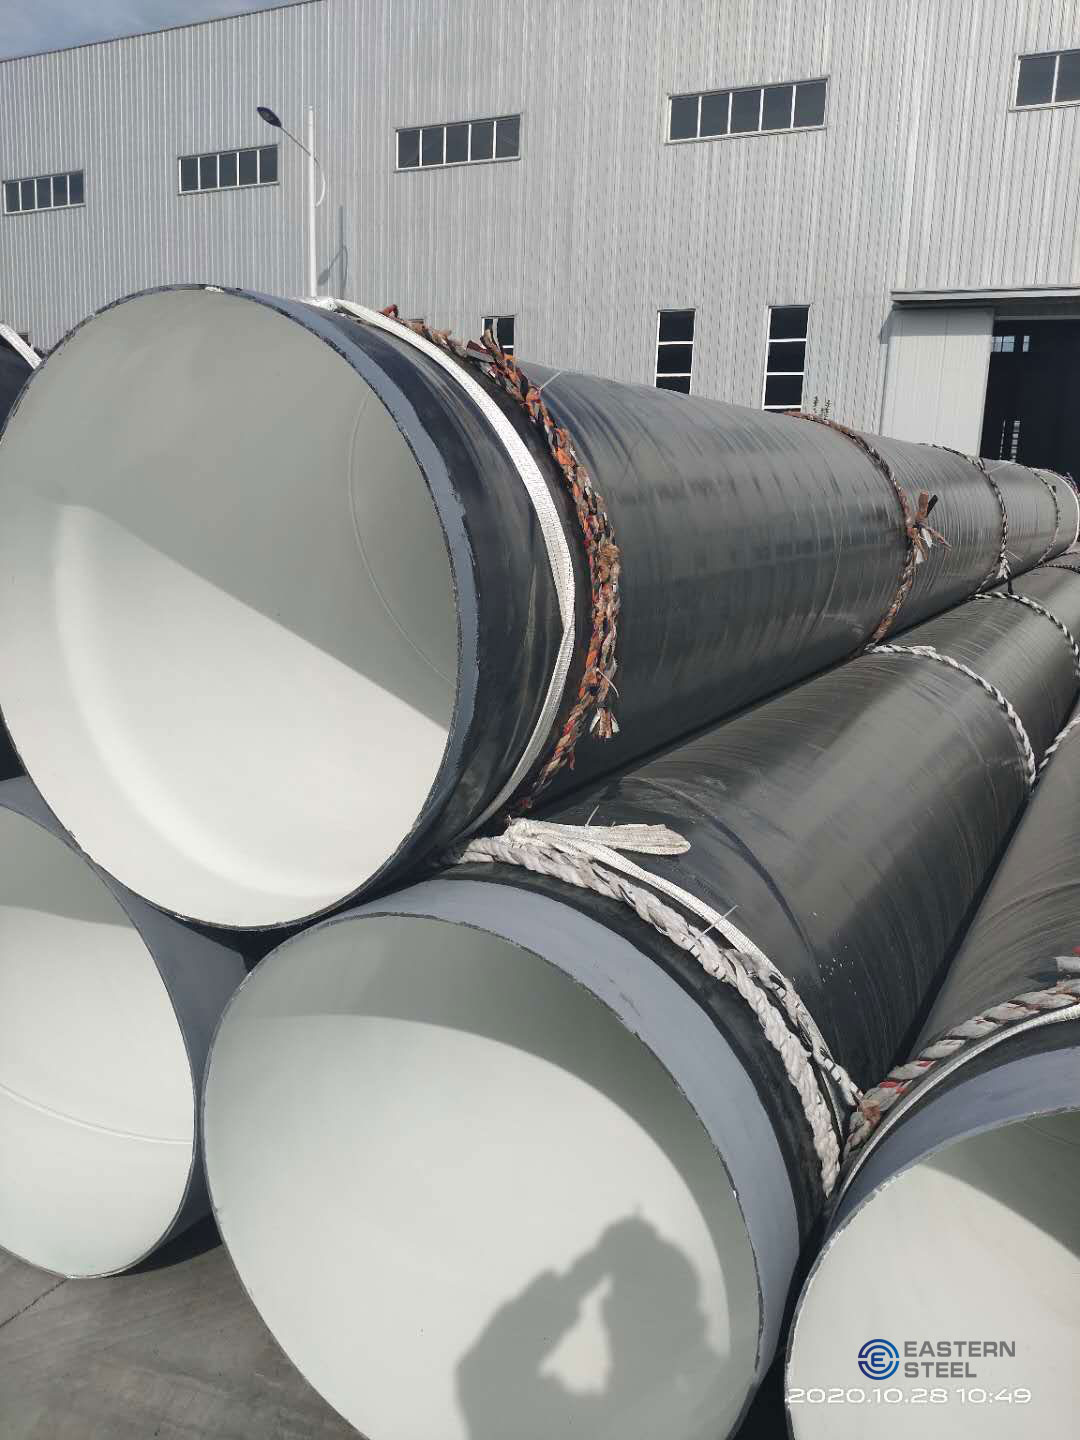 SSAW steel pipes on site are will to shipping